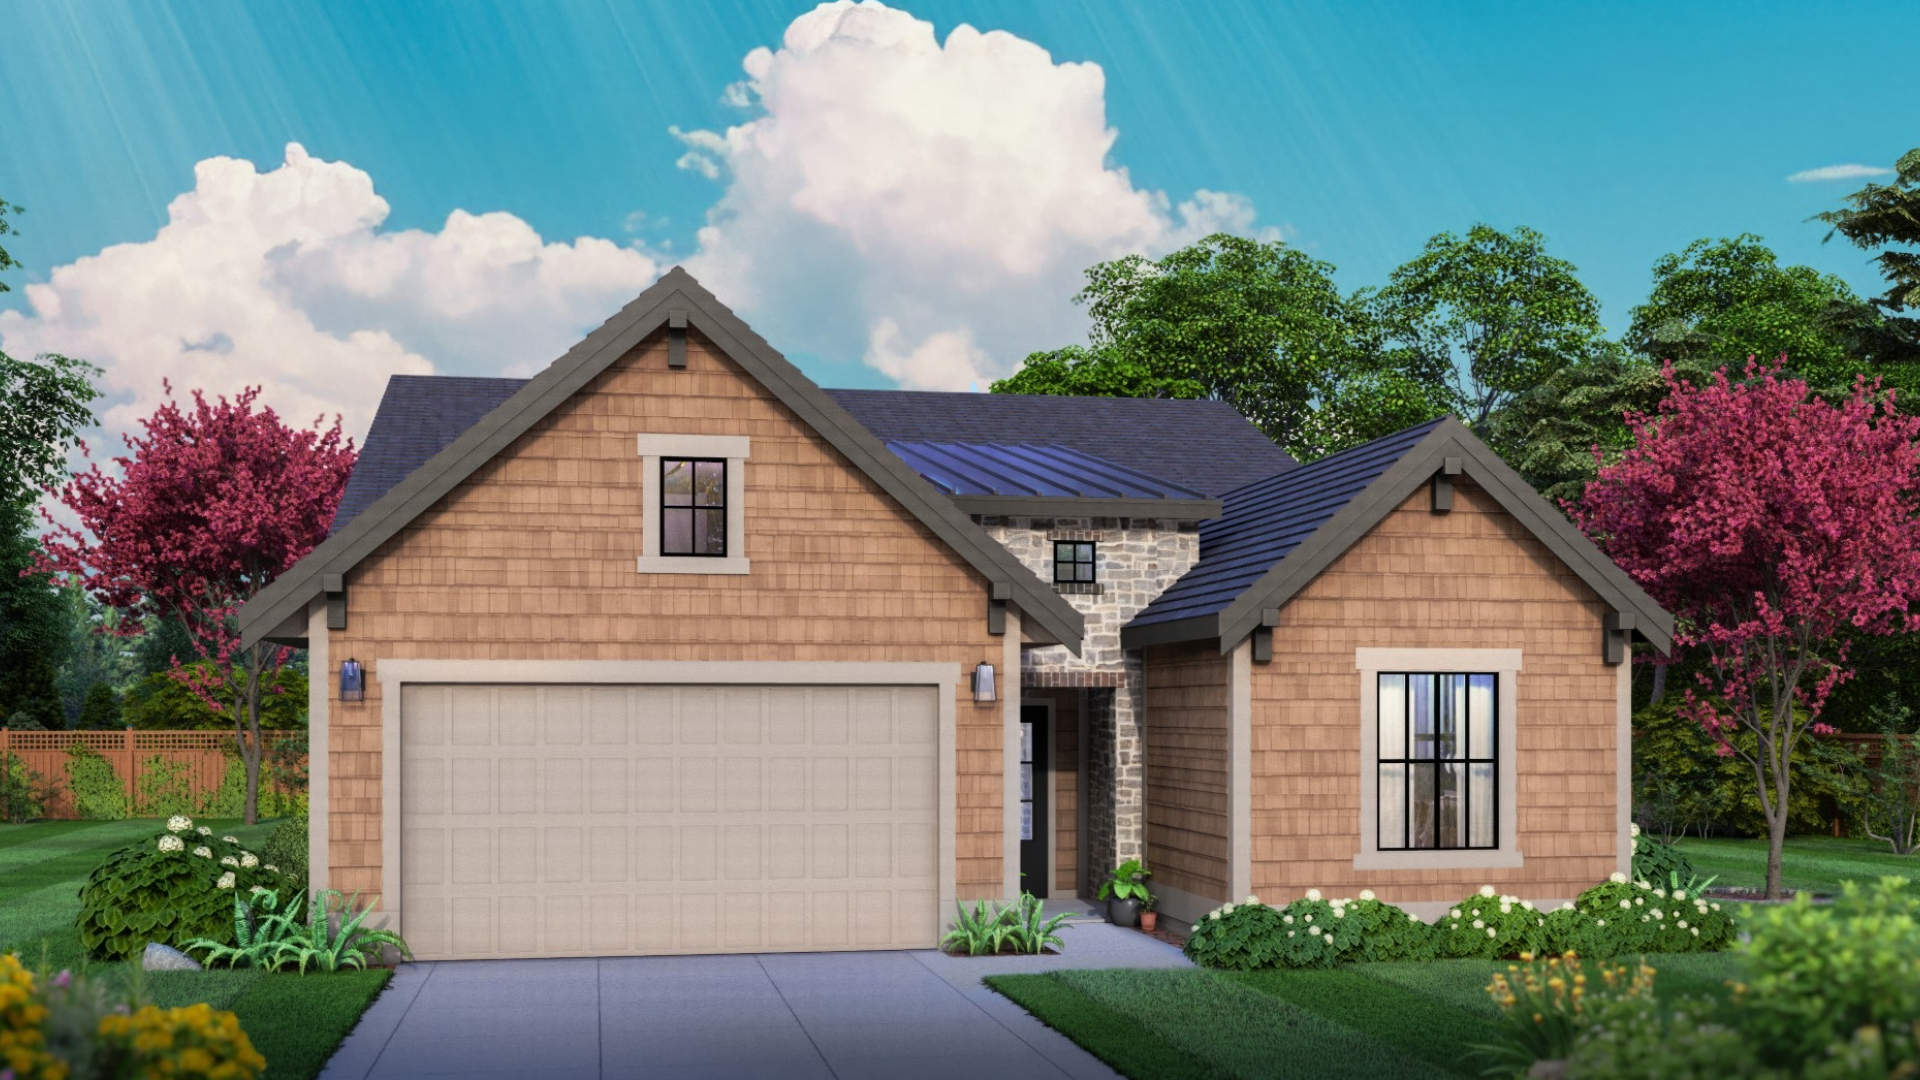 The three-bed, two-bath and two-car garage home is valued around $700,000. This year's giveaway winner will be announced on June 2 on KTVB Channel 7.